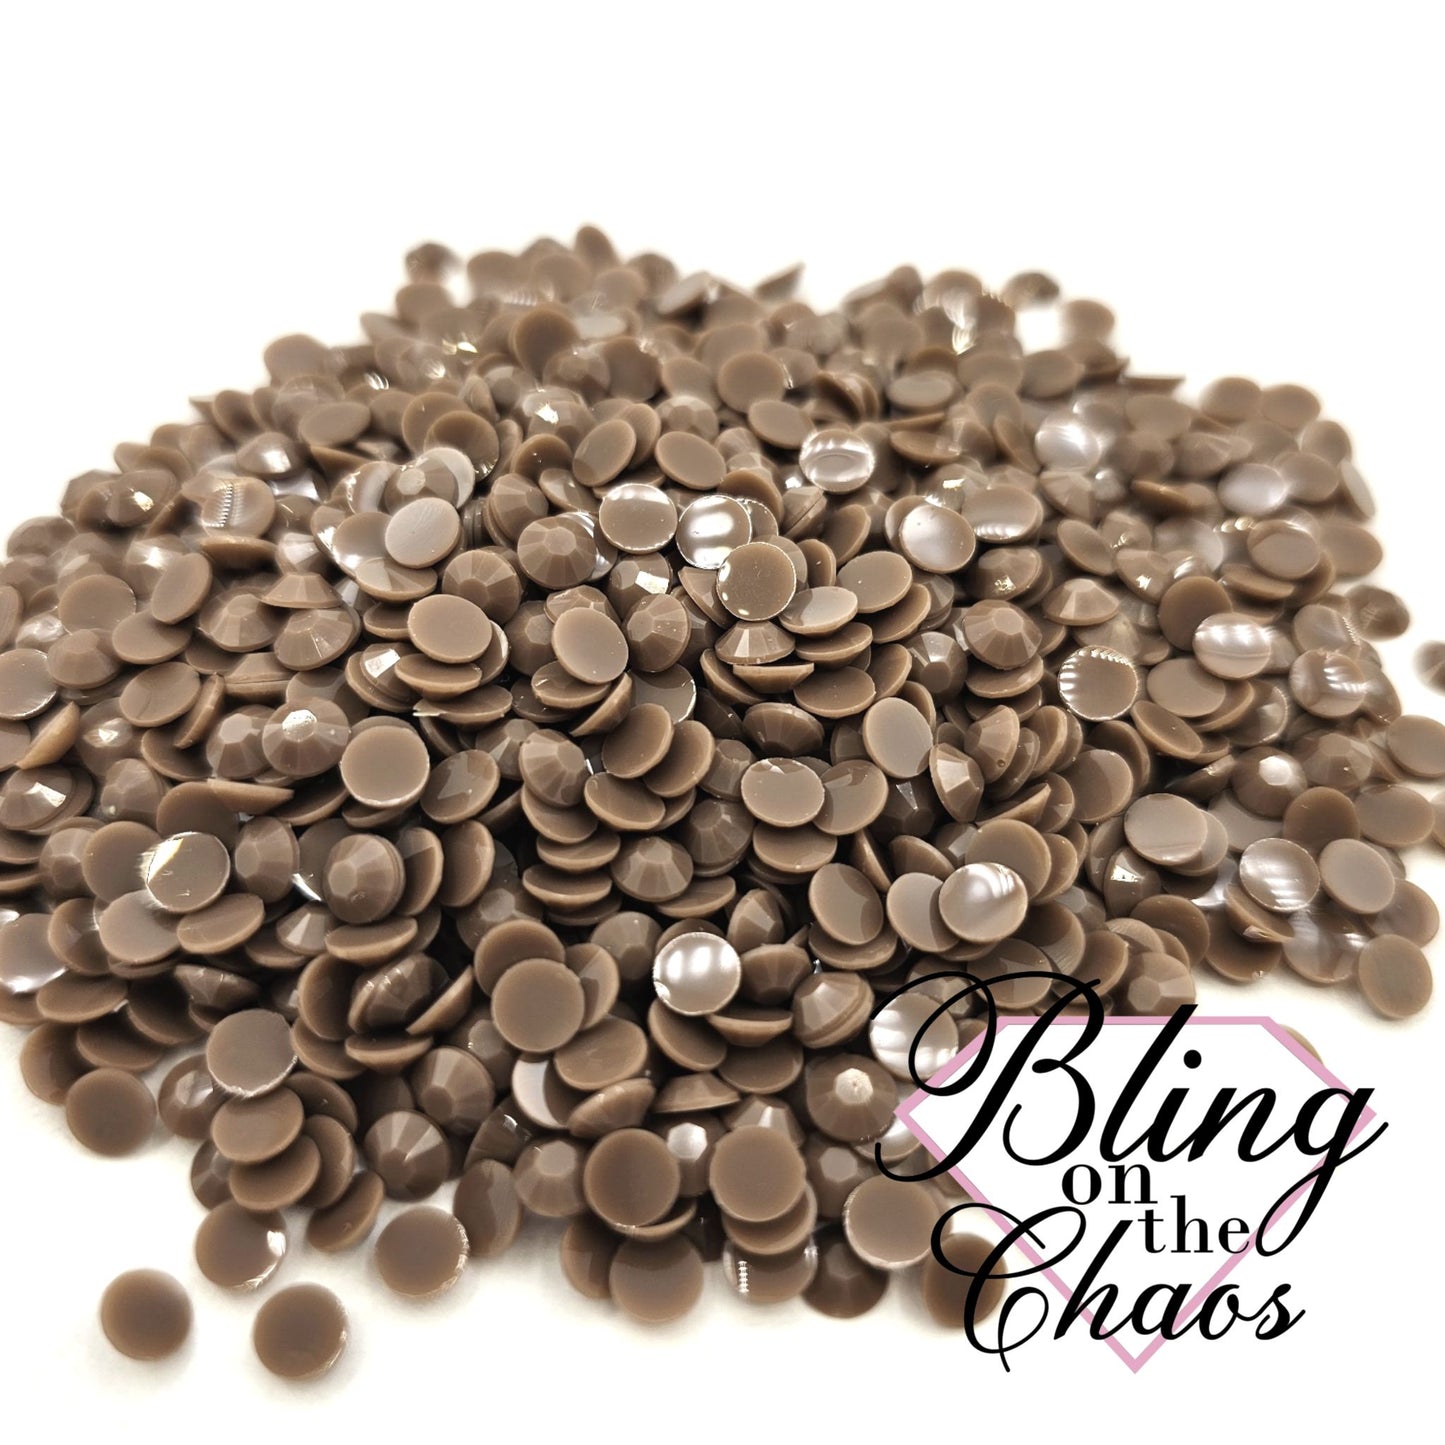 Coffee Solid Jelly Resin Rhinestone-Jelly Resin Rhinestones-Bling on the Chaos